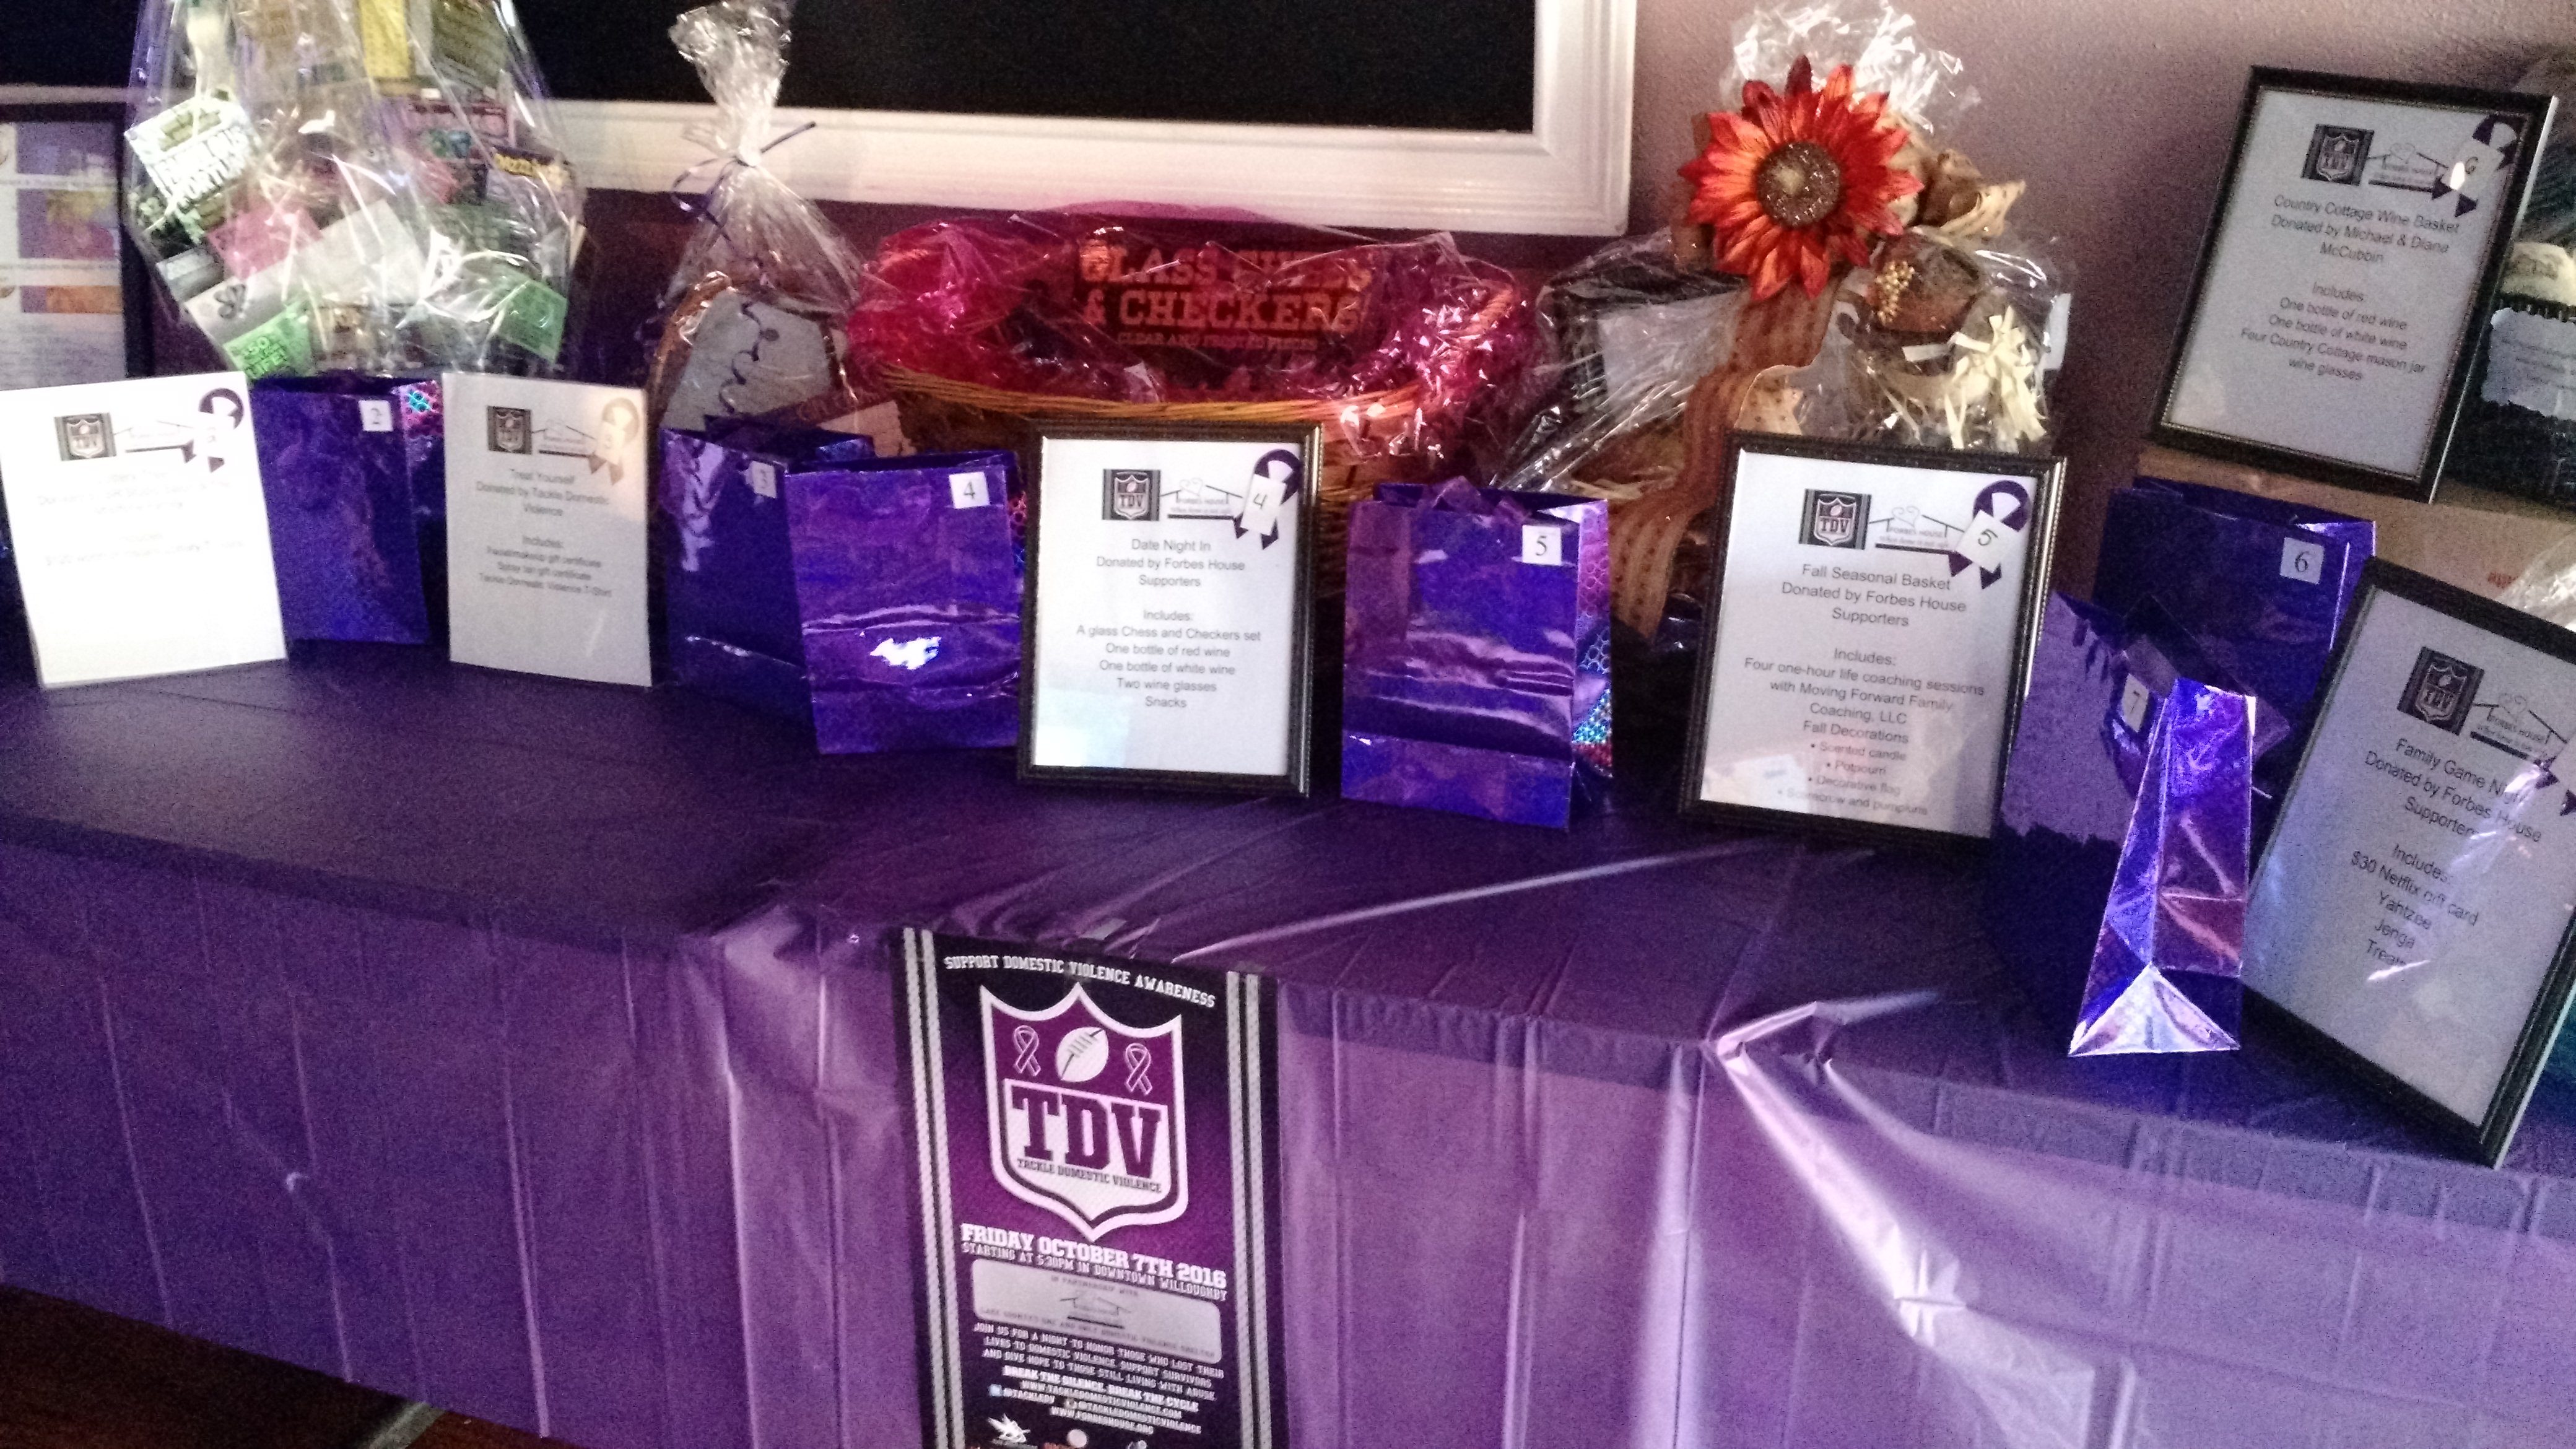 Chinese Raffle Prize Table at Tackle Domestic Violence Event in October 2016